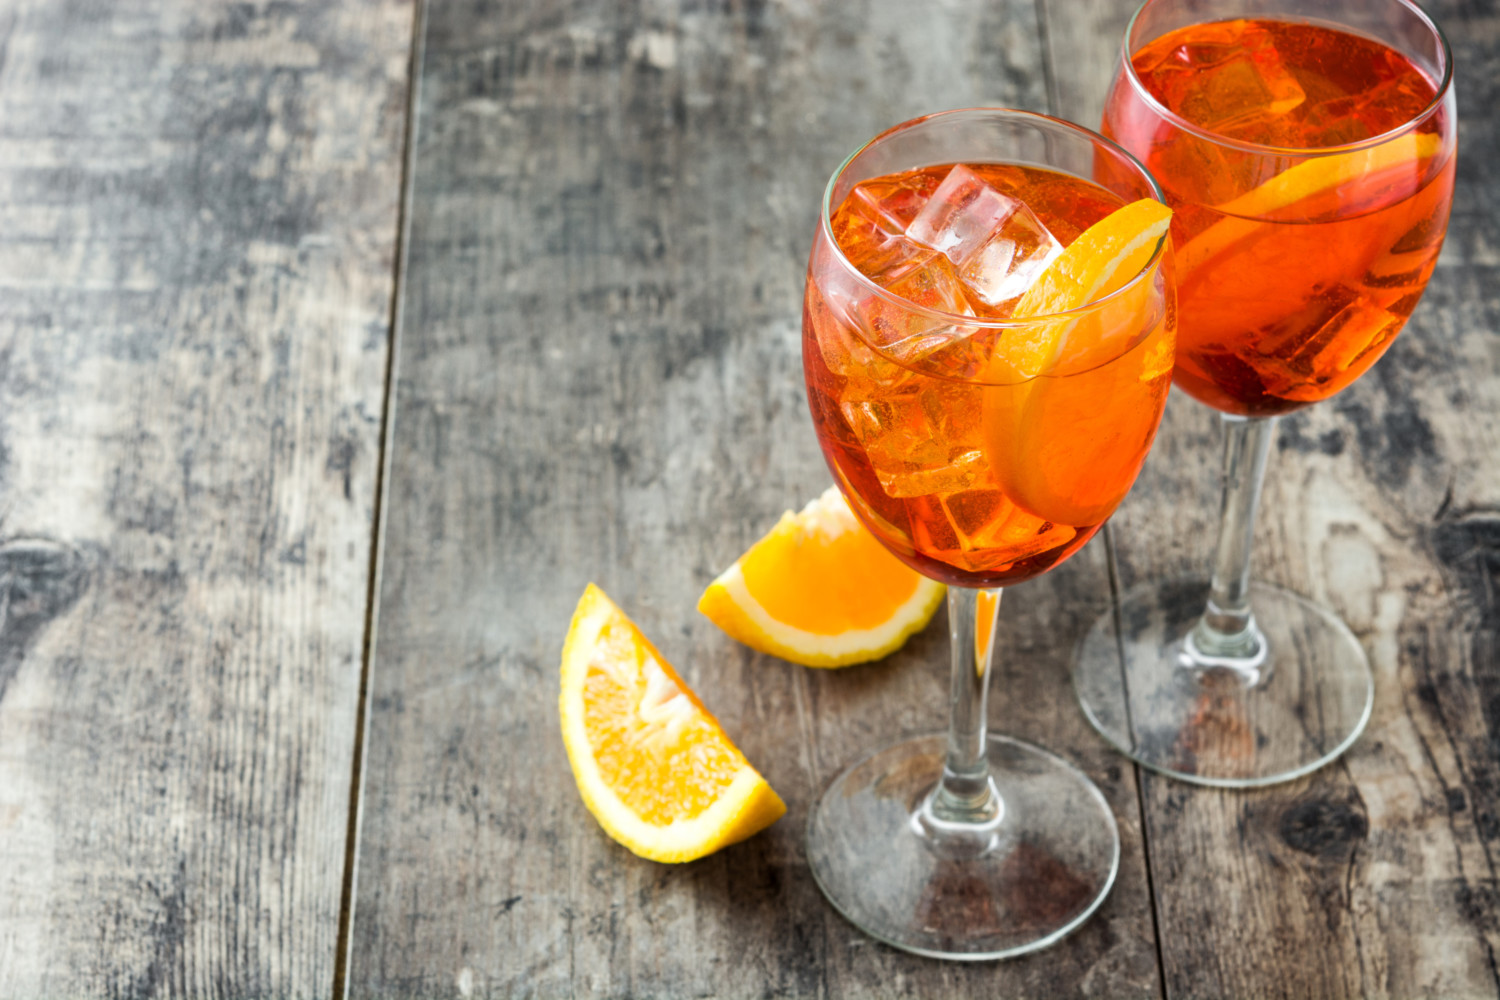 Aperol spritz - one of the most popular cocktails in the world